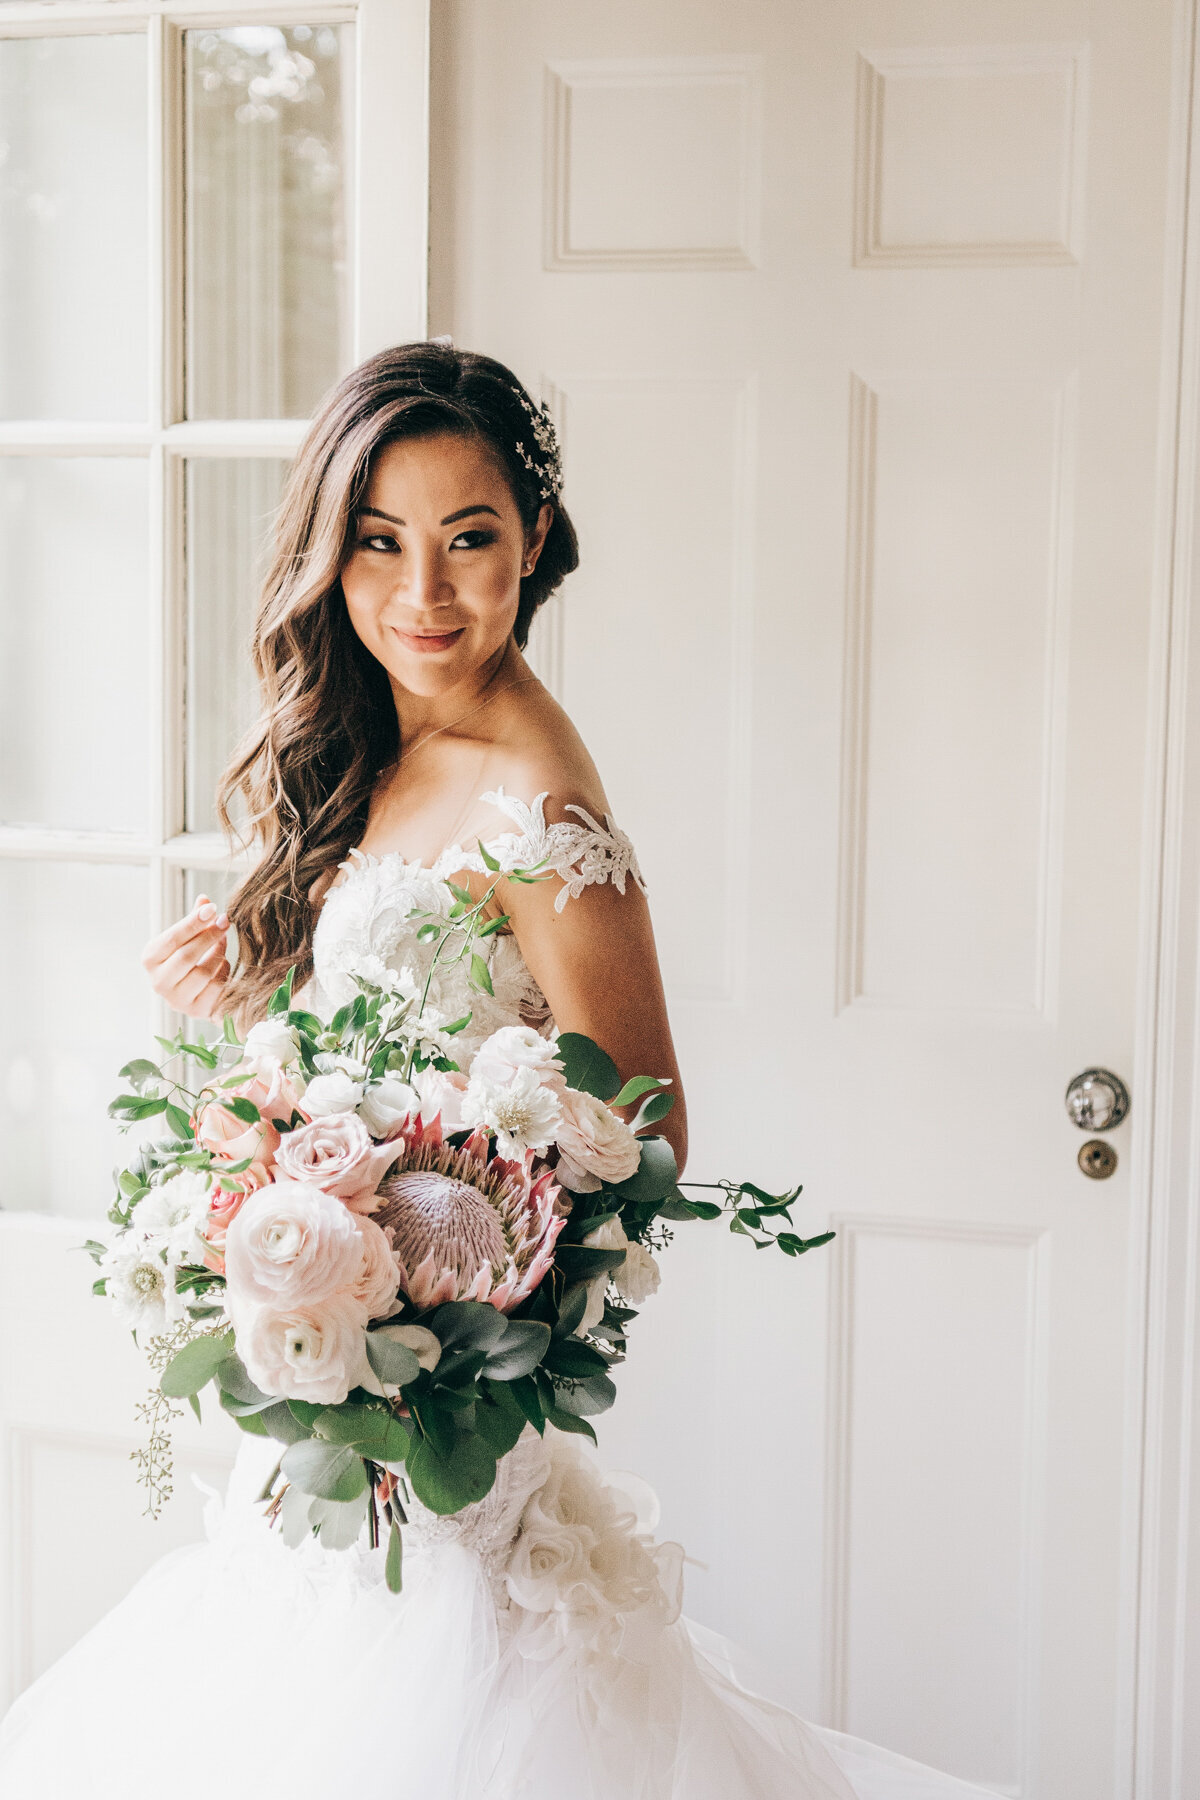 Glamorous portrait of bride holding pink and white bouquet